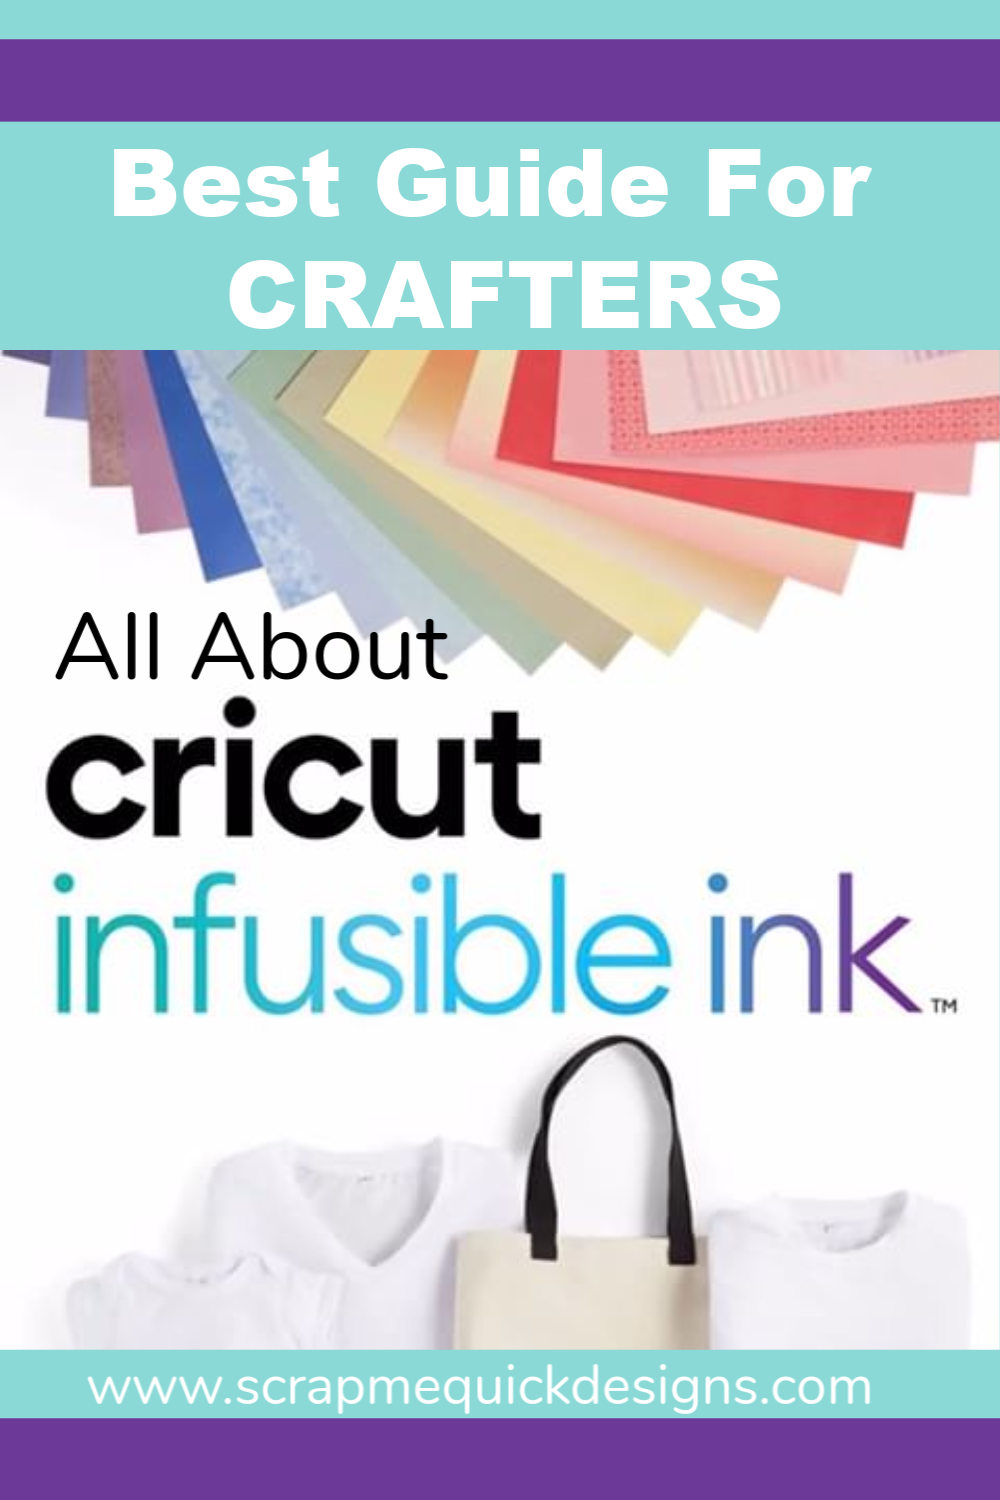 Introducing Infusible Ink: An all new way to get professional